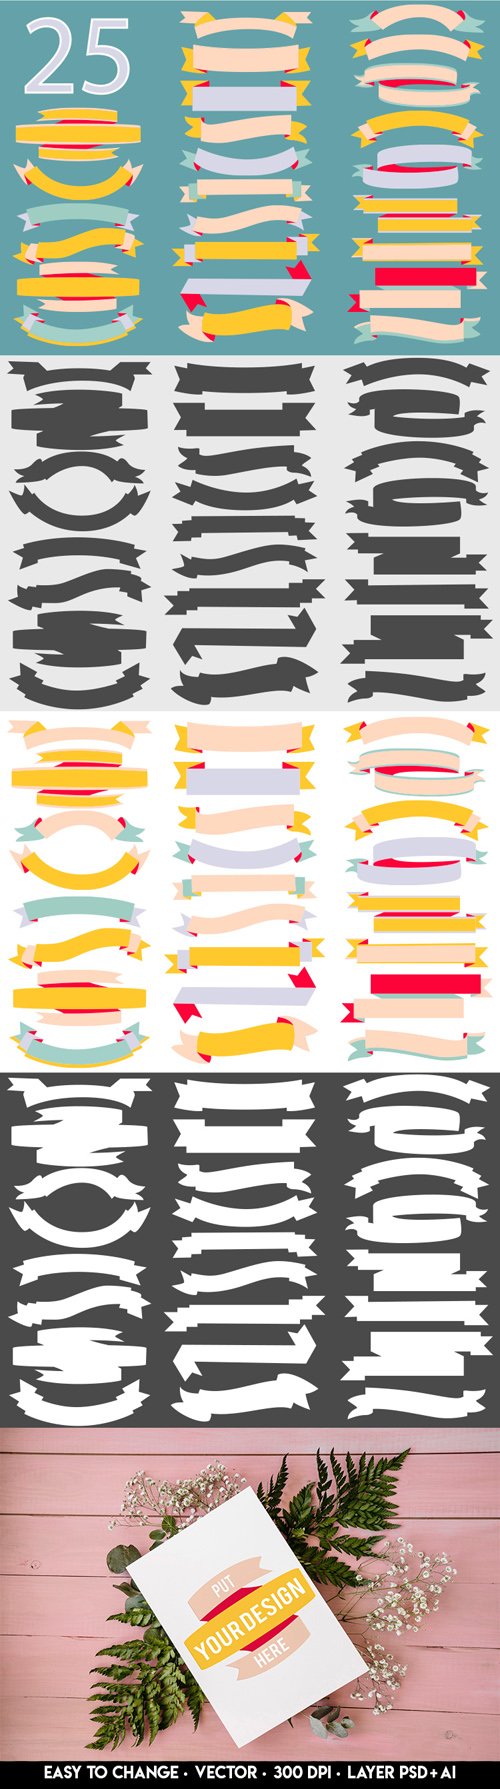 Ribbon & Banners Vector Collection